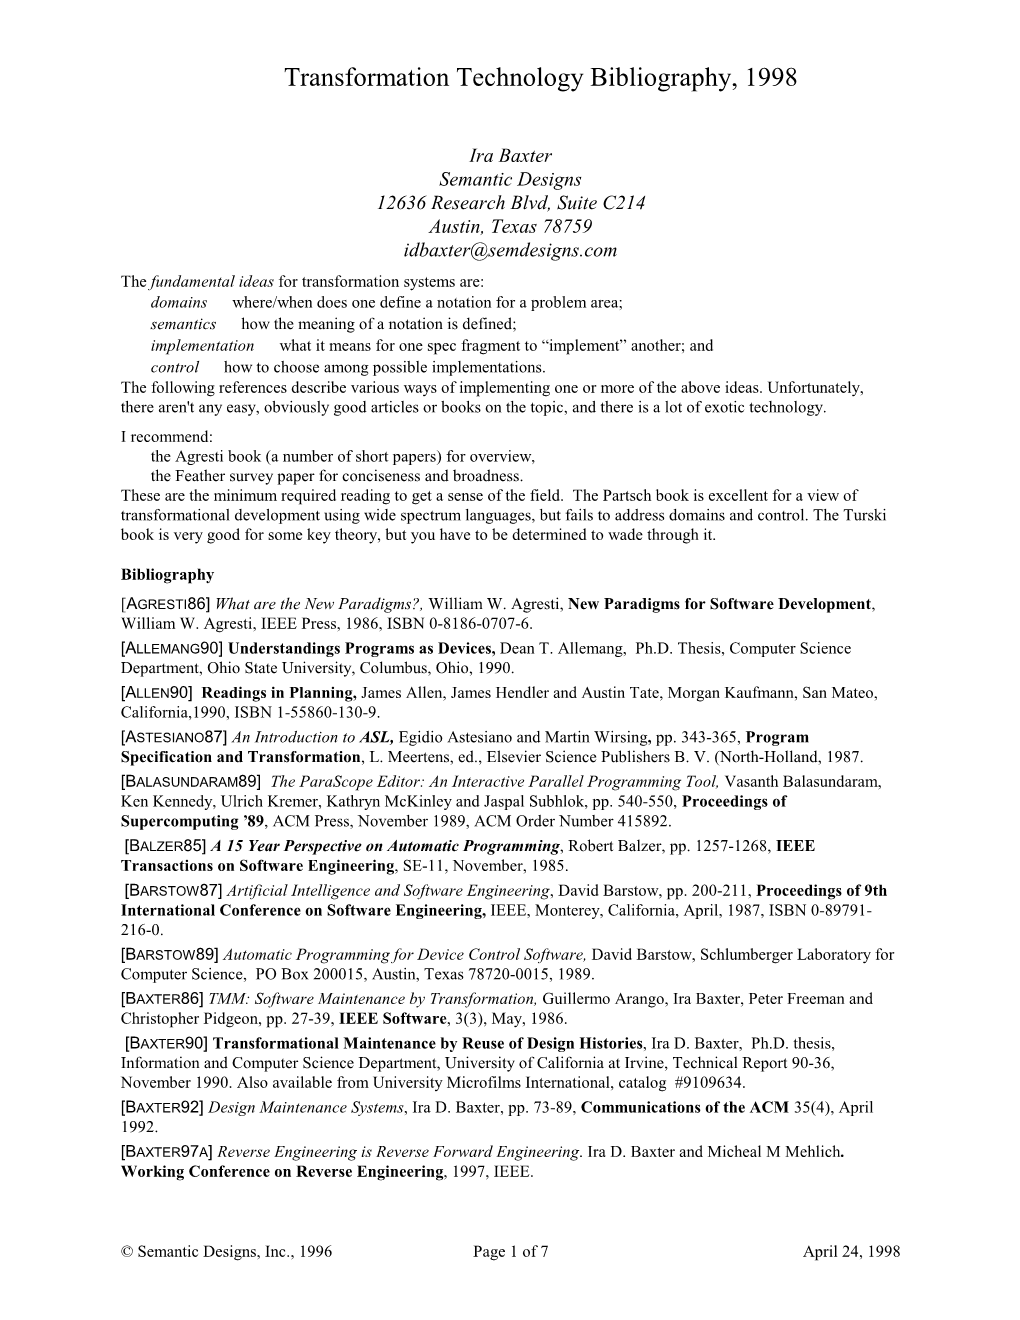 Bibliography on Transformation Systems (PDF Format)